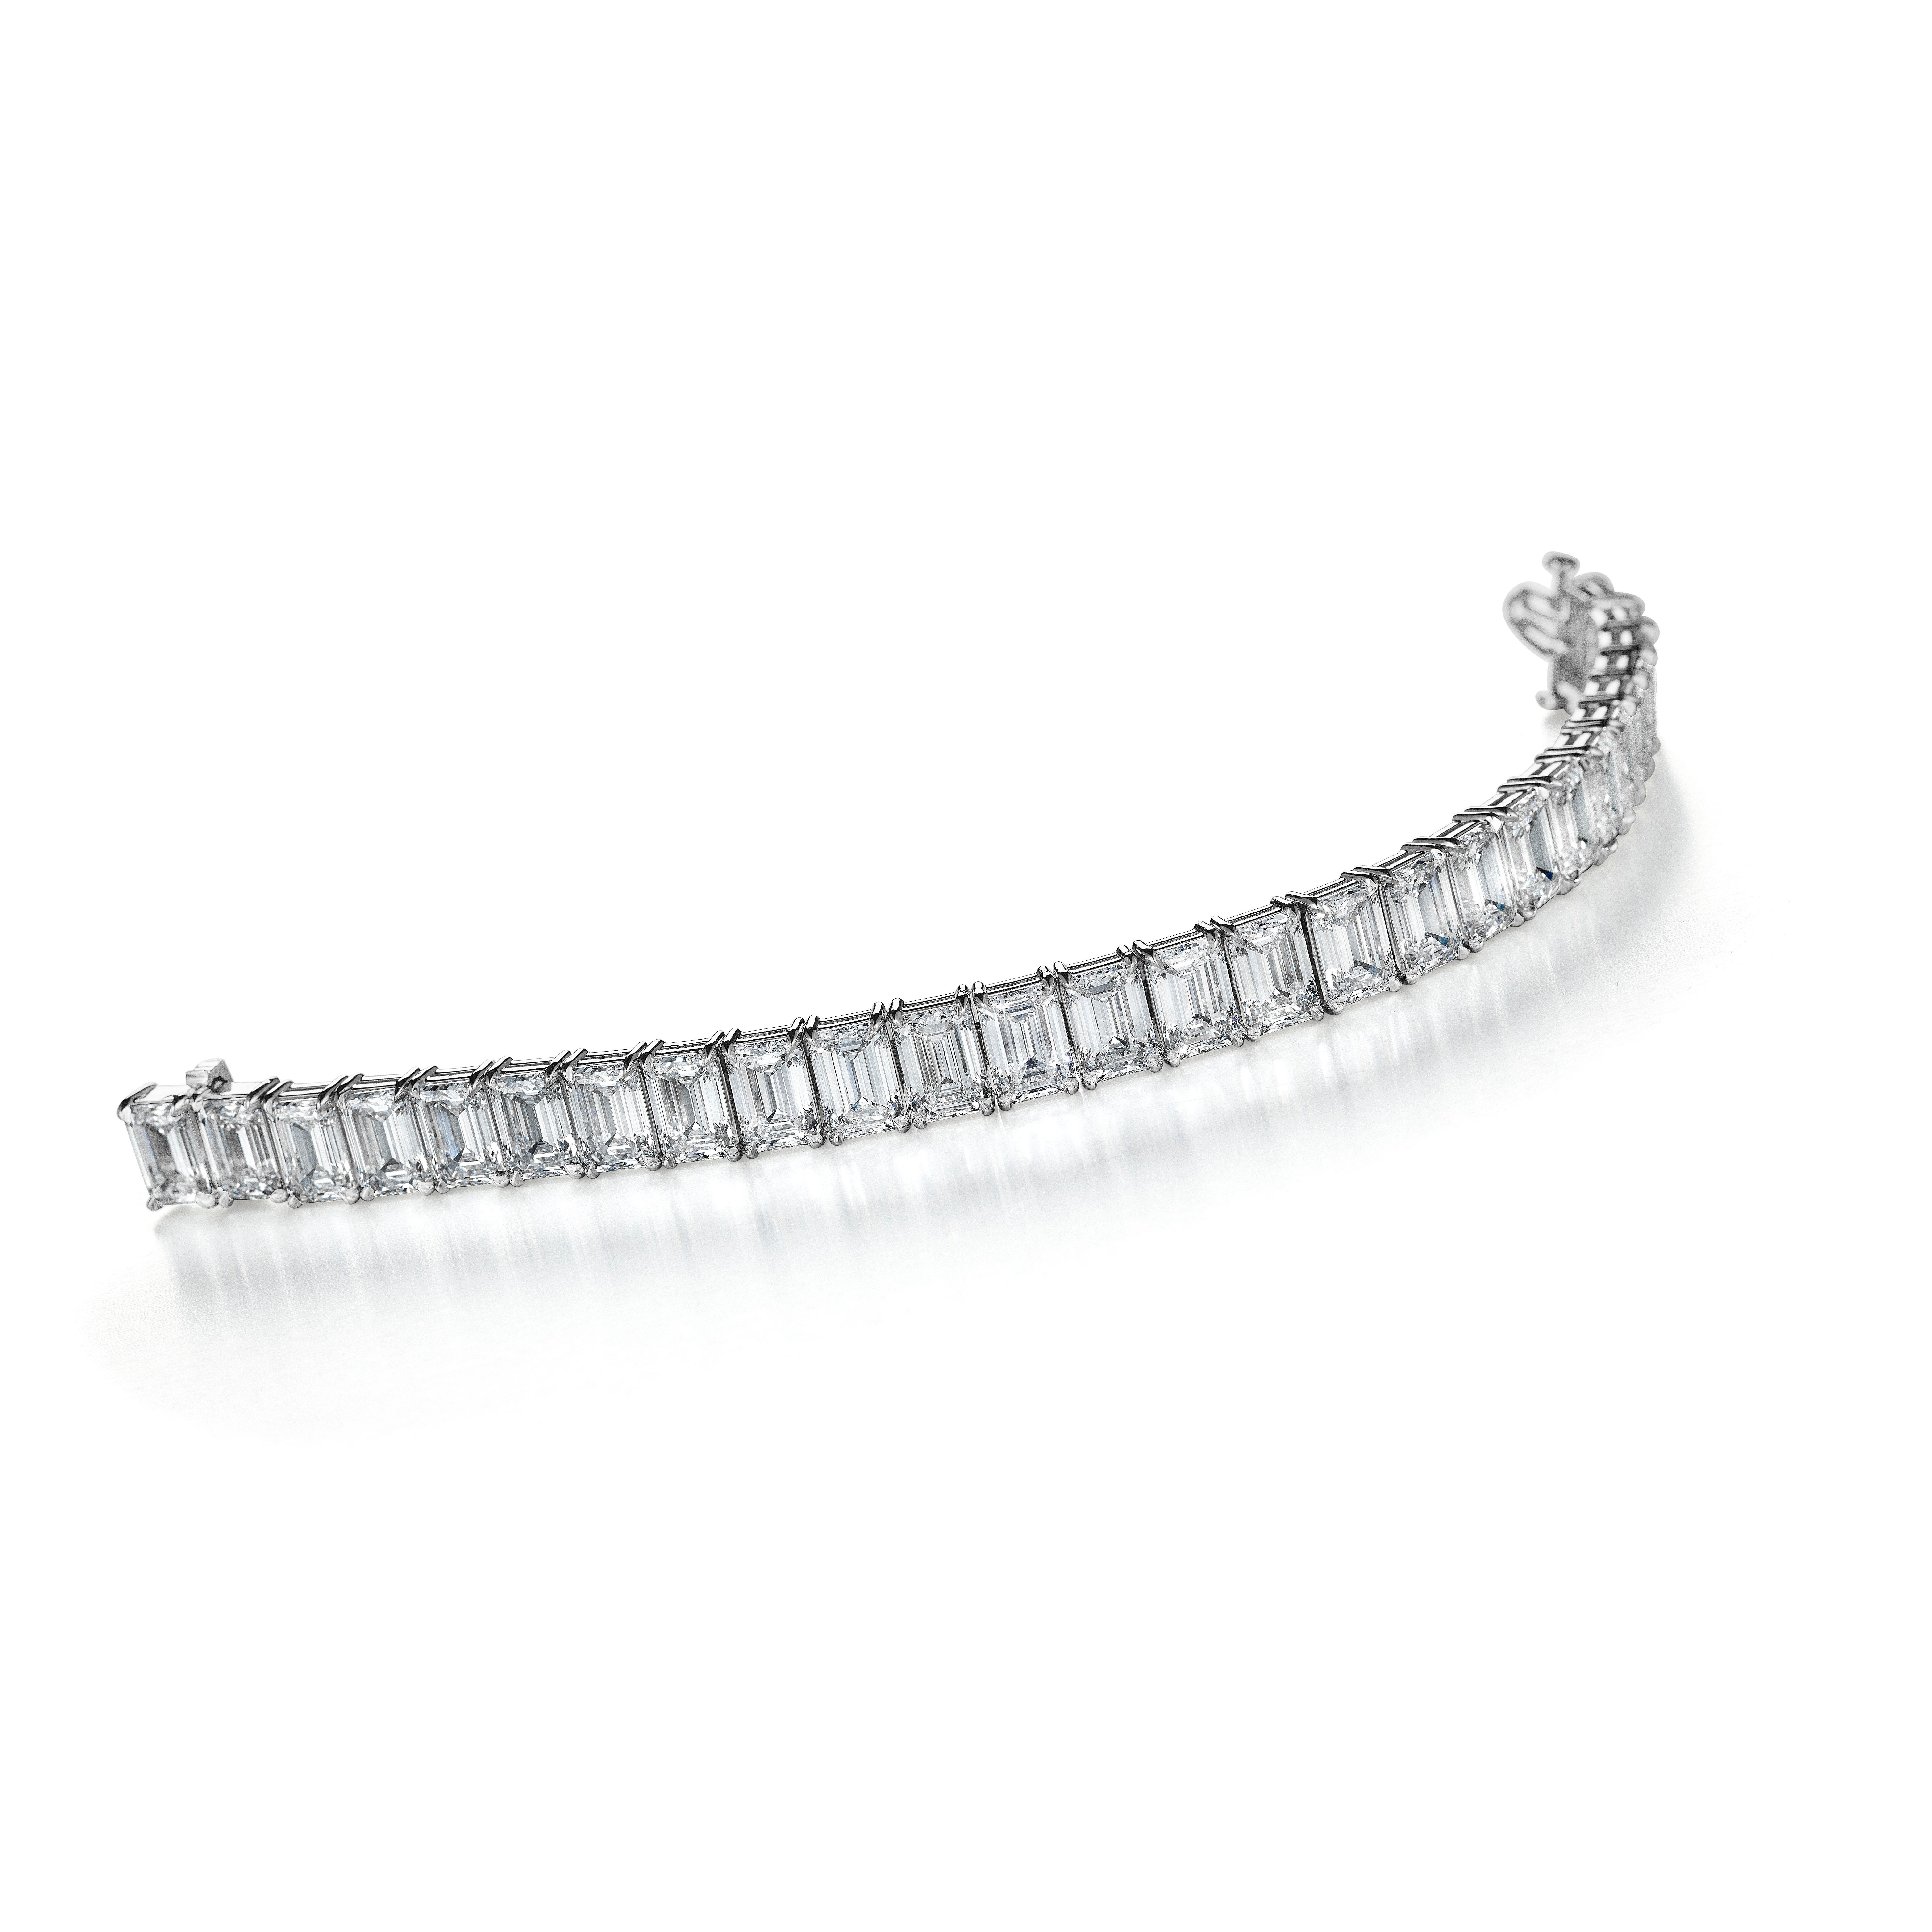 The Ultimate Emerald Cut Tennis Bracelet

Each stone weighing 2 carats each with GIA Certificates grading the stones D-F color and VS-VVS clarity.
Set in Platinum. 7 inches.

Weights and price vary depending on confirmed order.
Custom only.